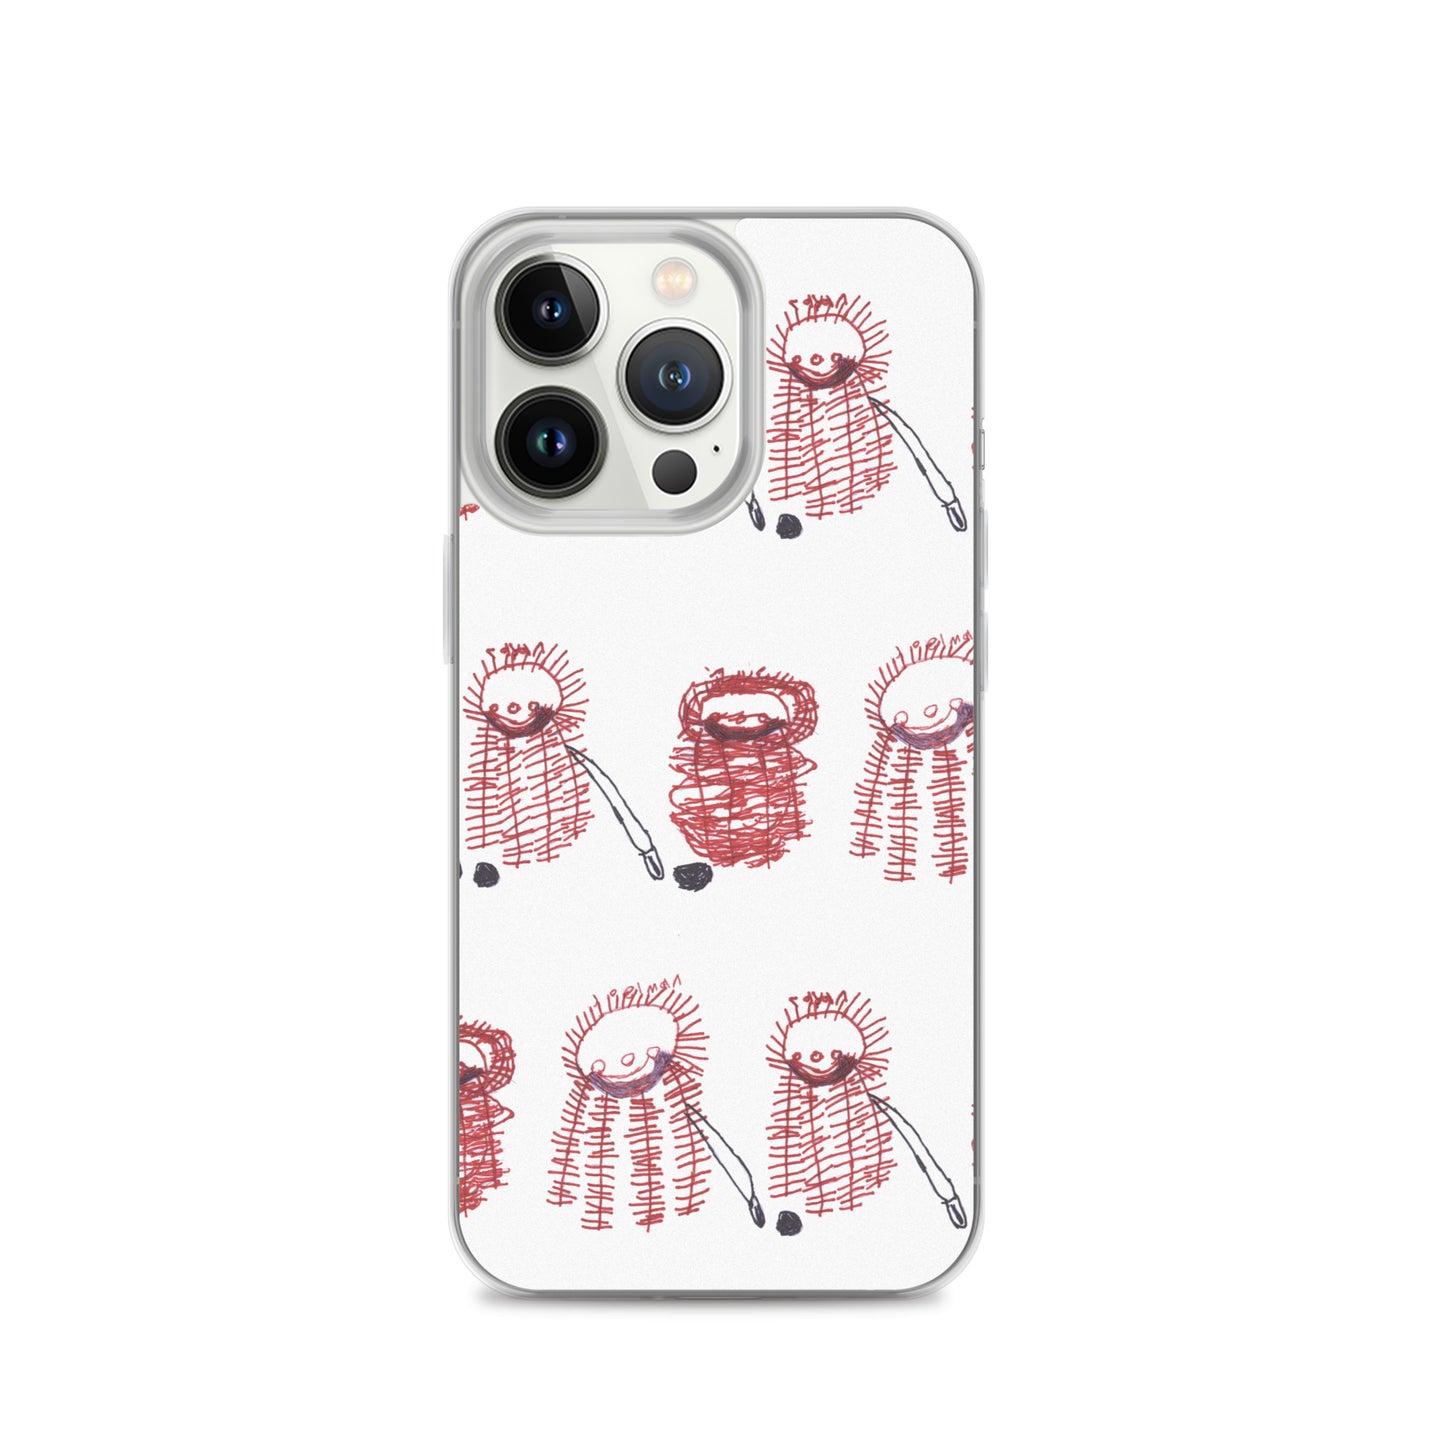 iPhone Case - "Playing Hockey with the Condors"